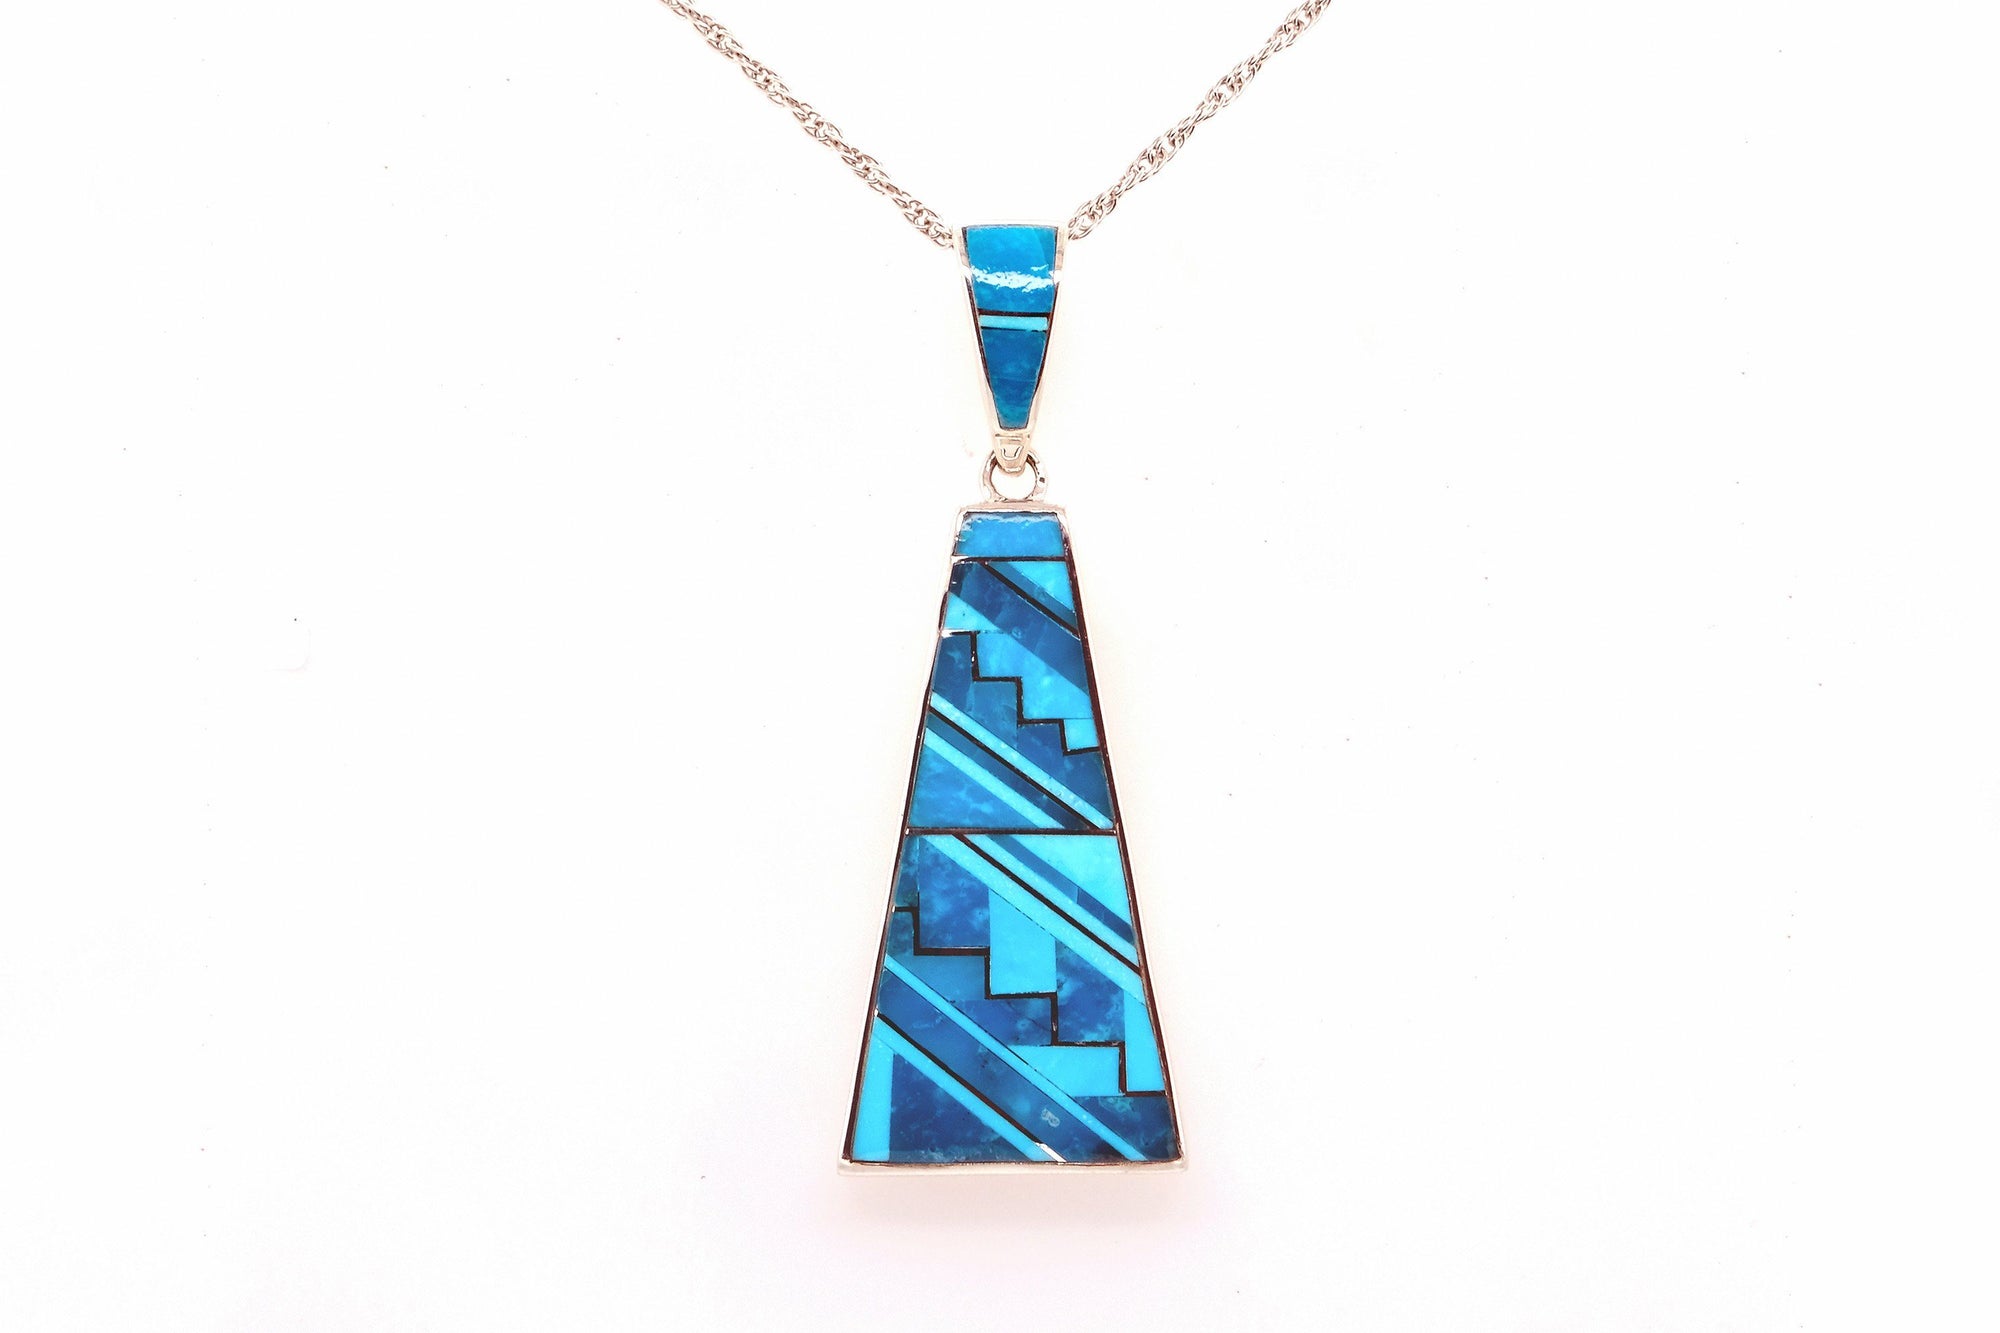 Two-Tone Turquoise Pendant by David Rosales